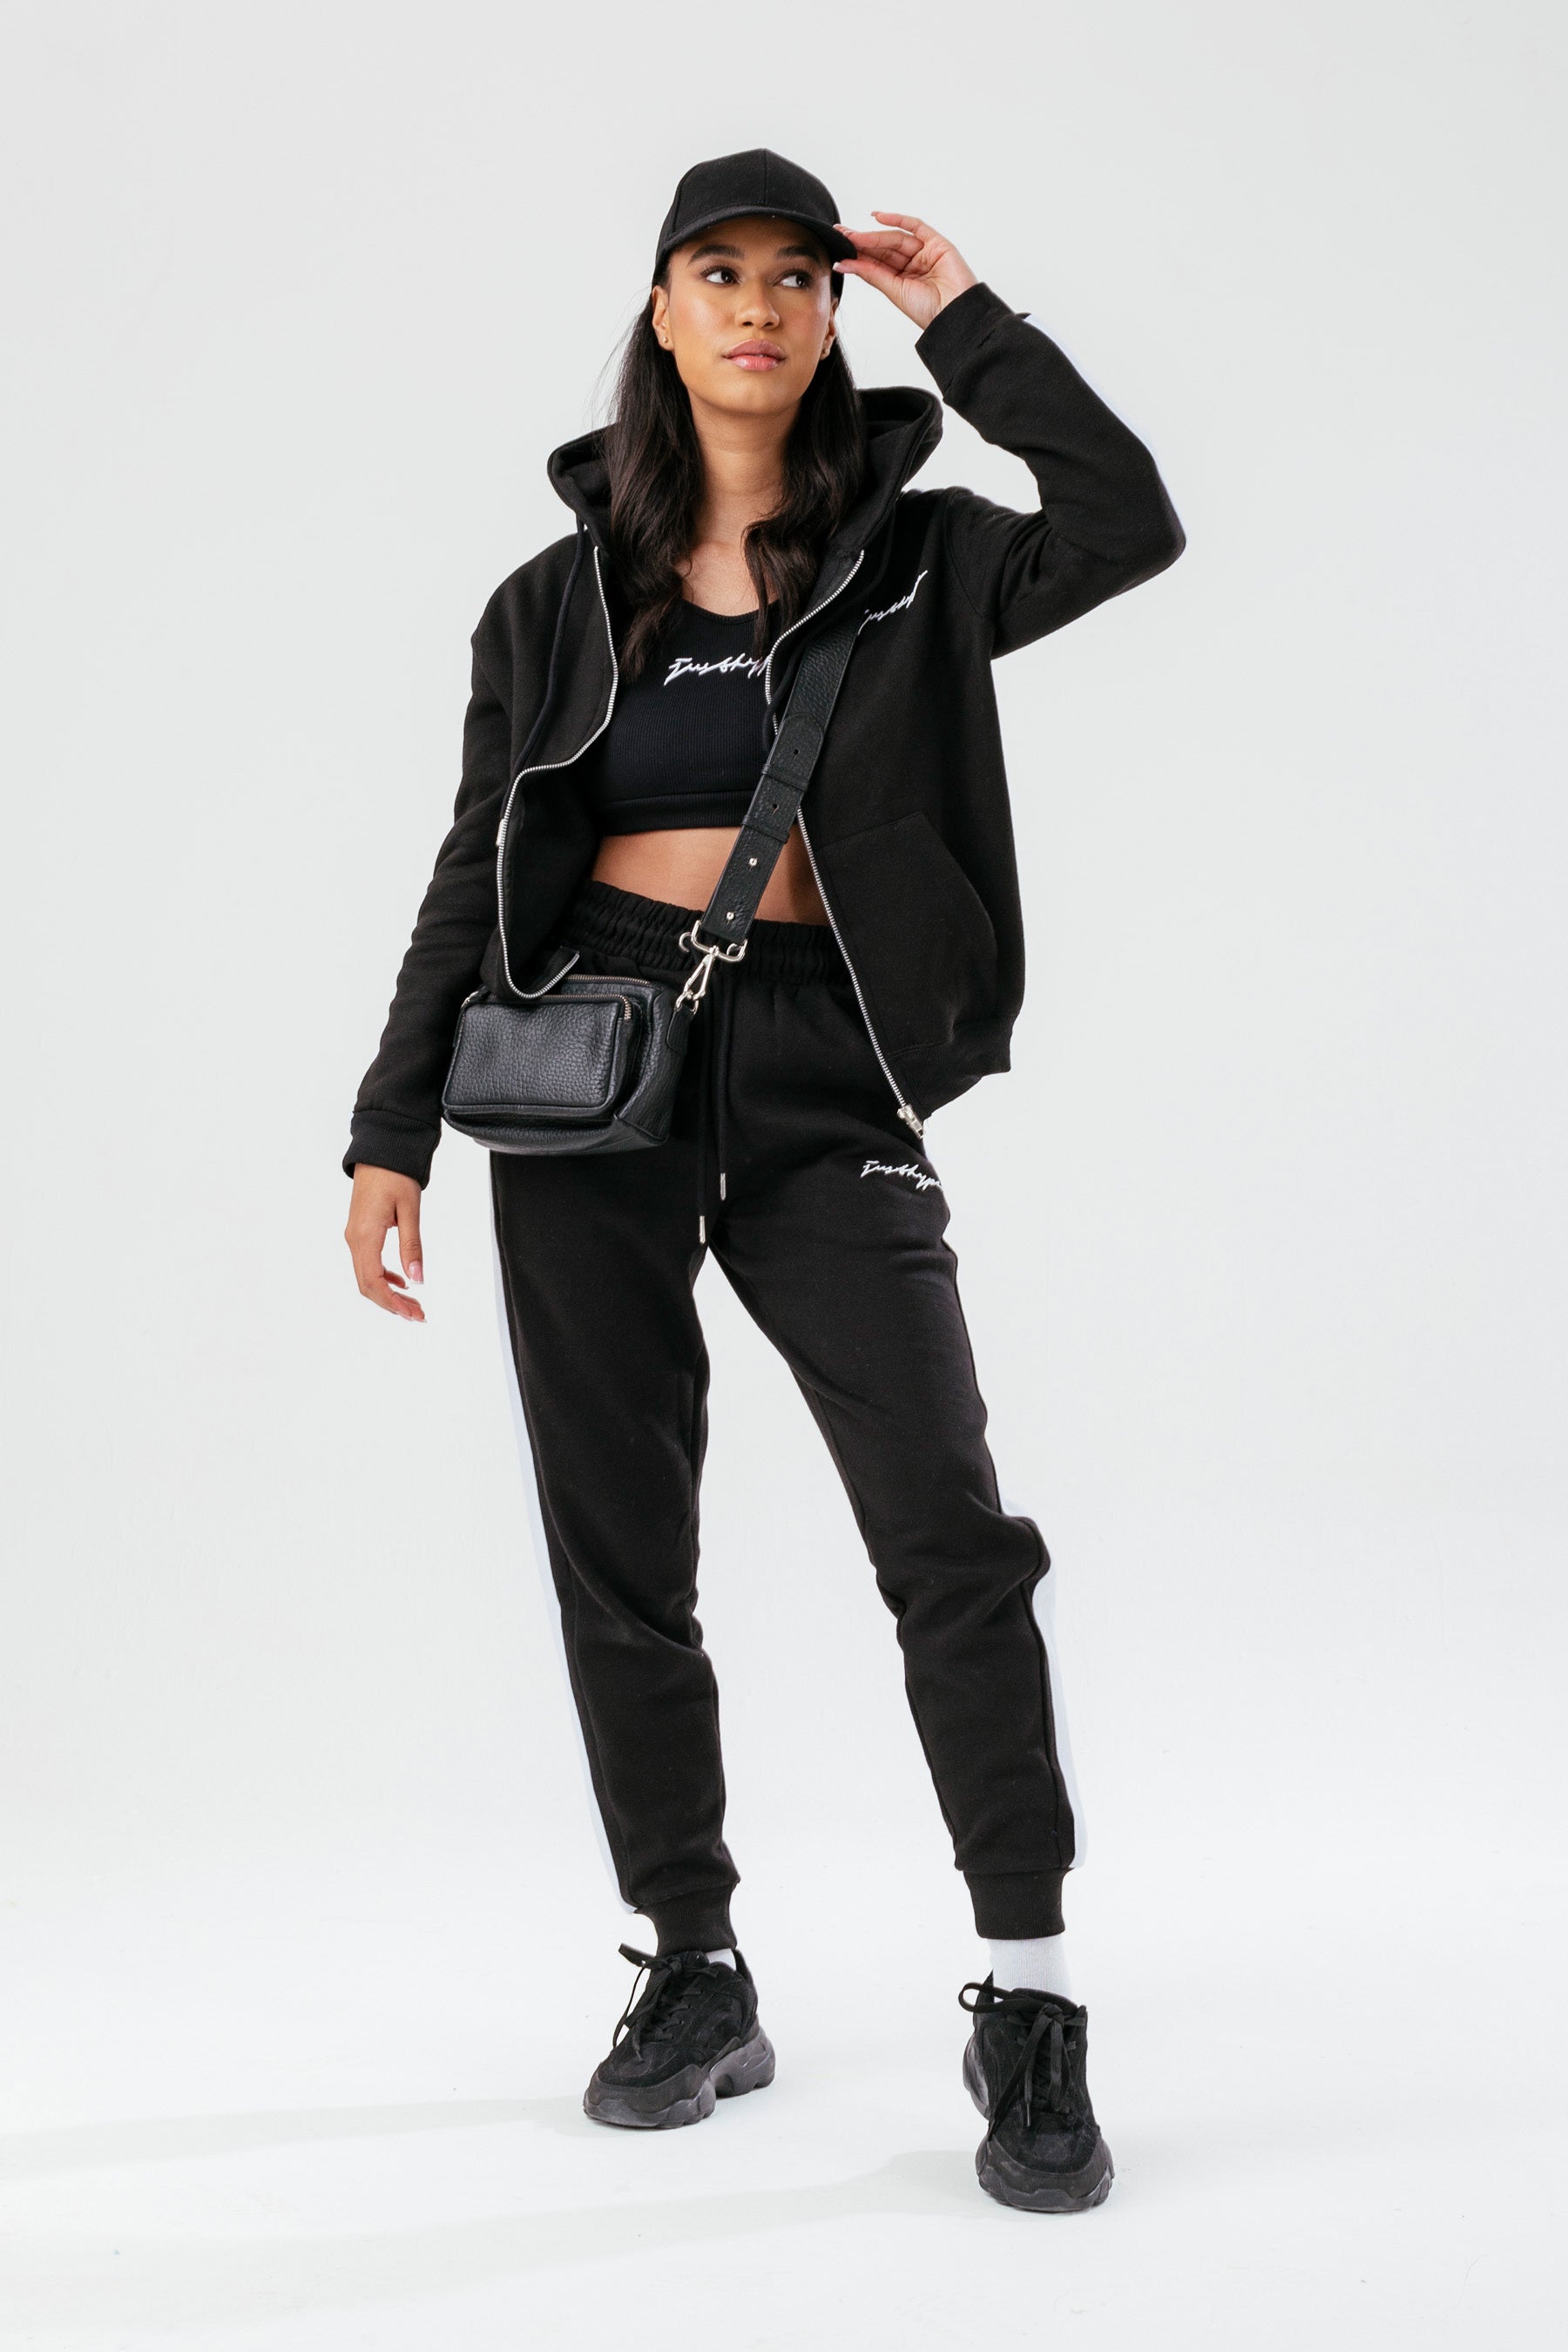 Taking Over Sweatpants - Black  Cropped hoodie outfit, Fashion